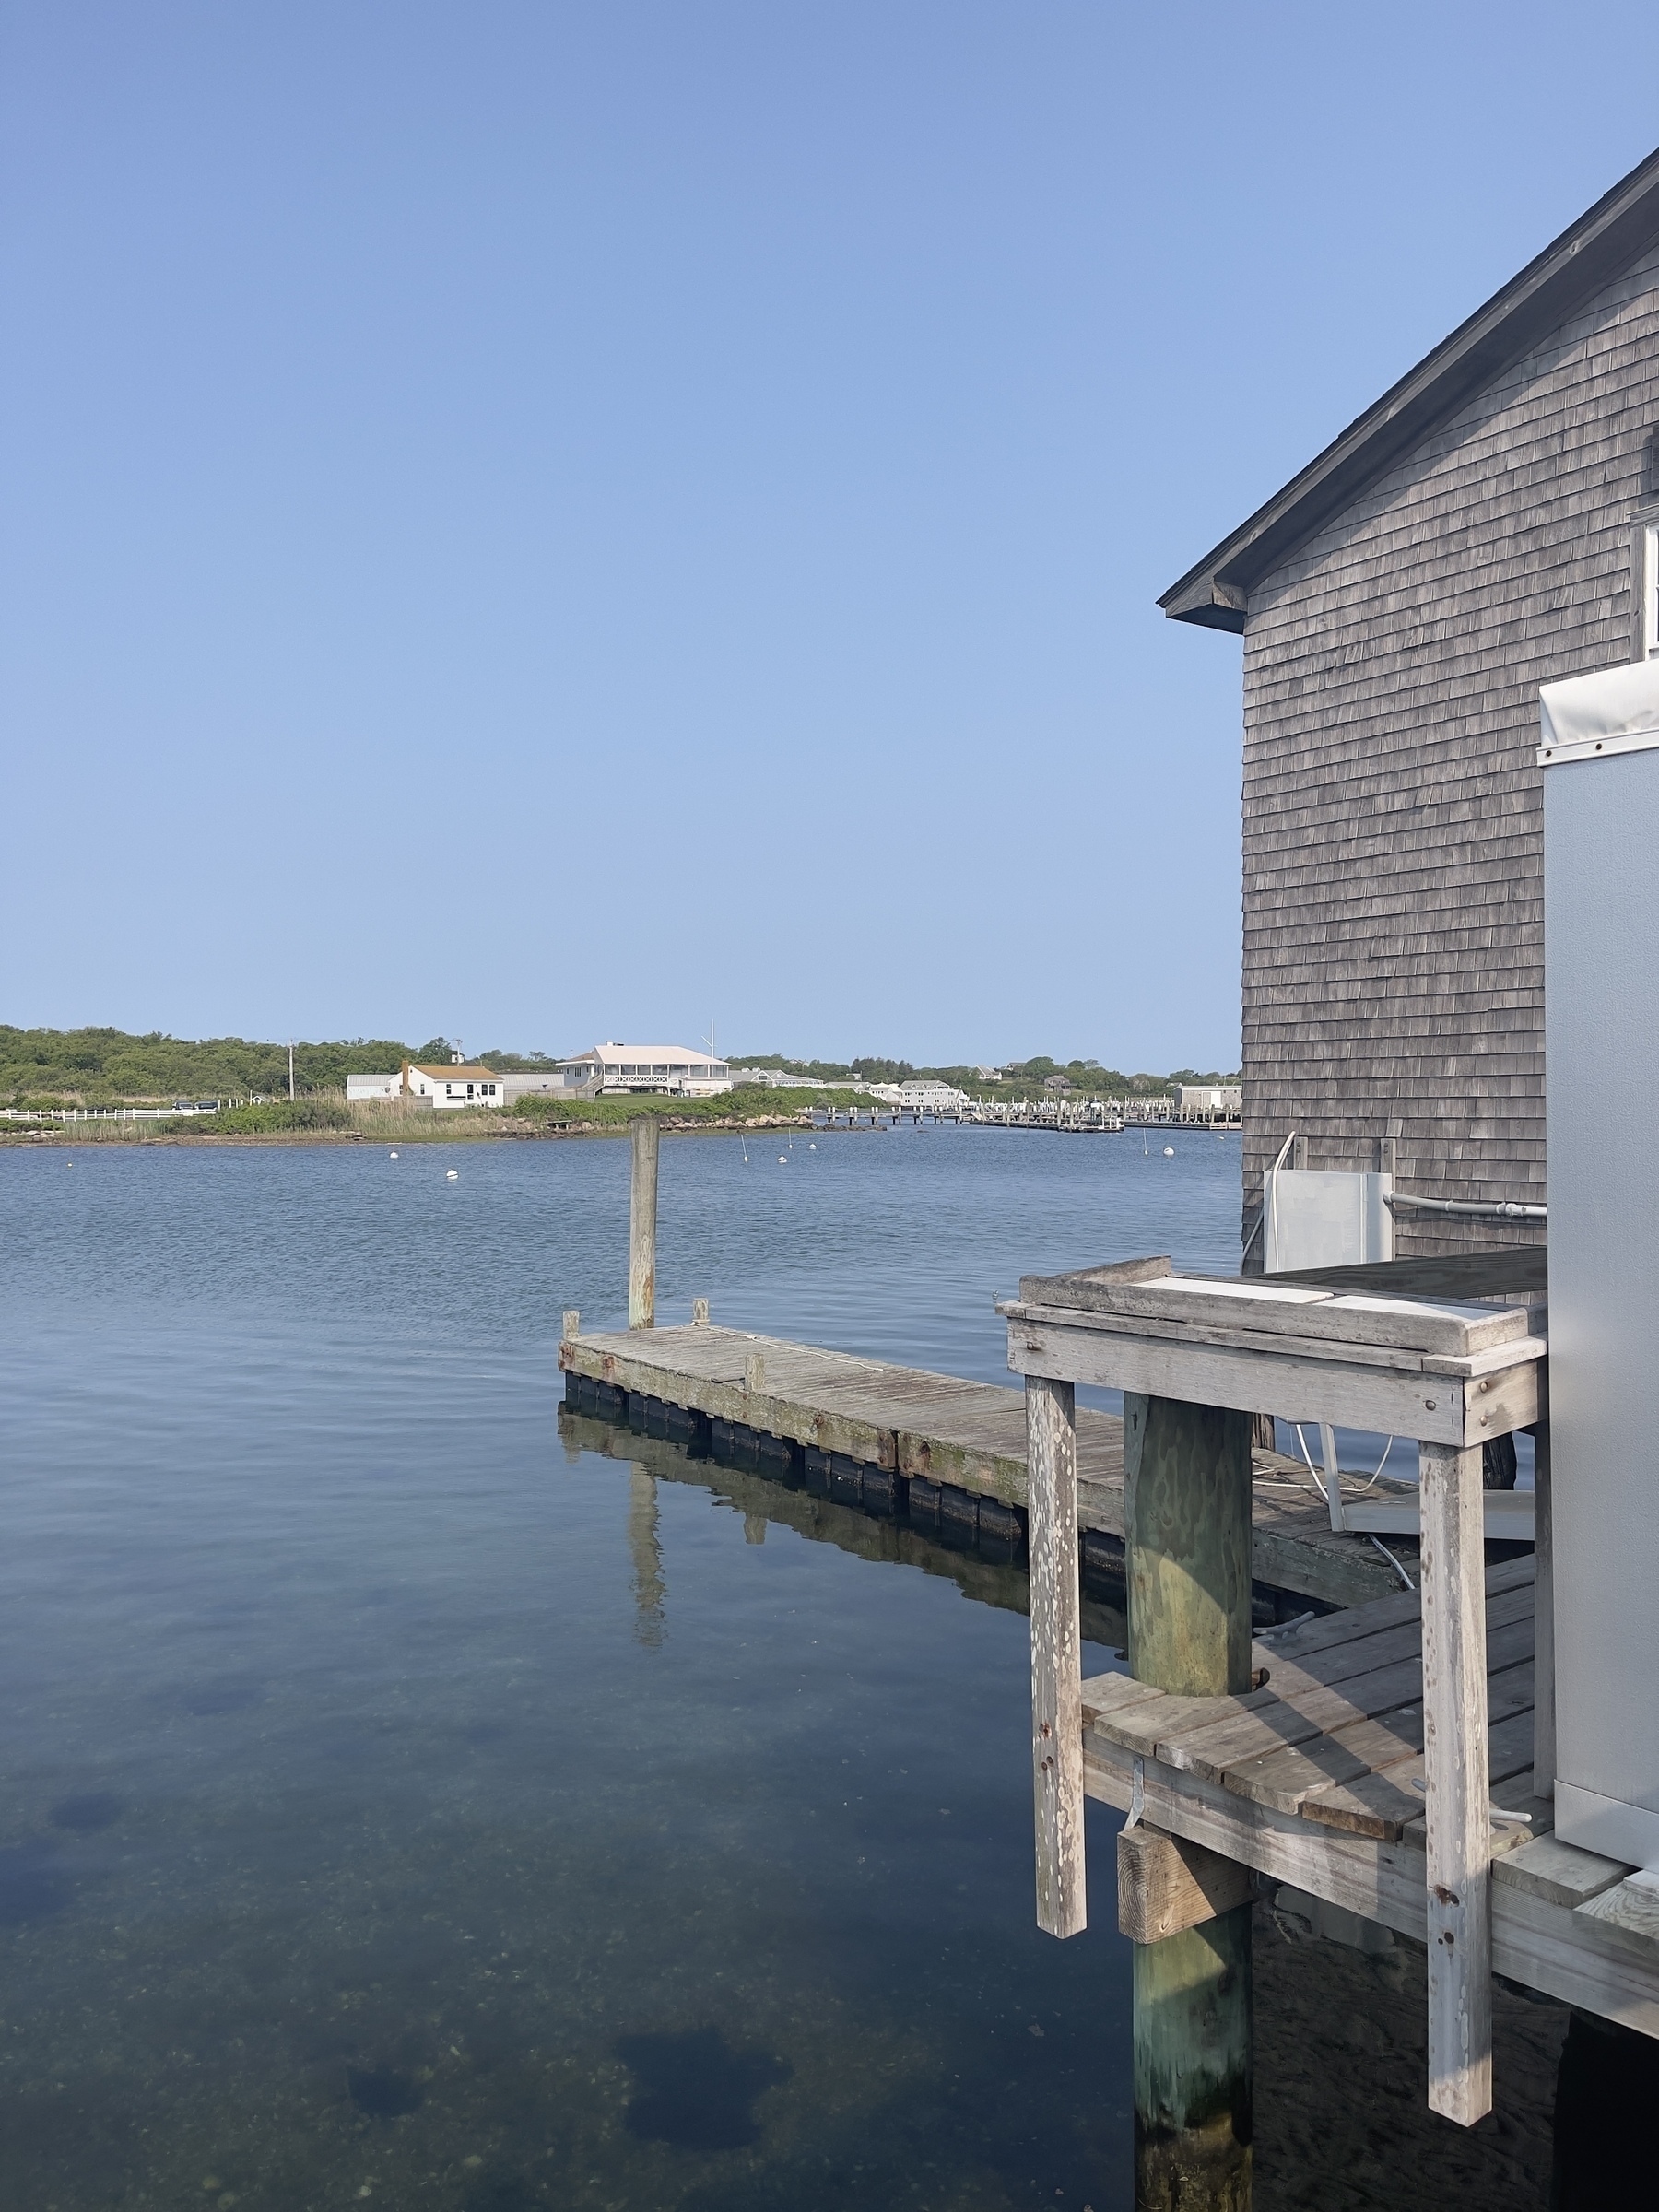 View of New Harbor past Payne’s Dock building on right. Day is sunny and calm.